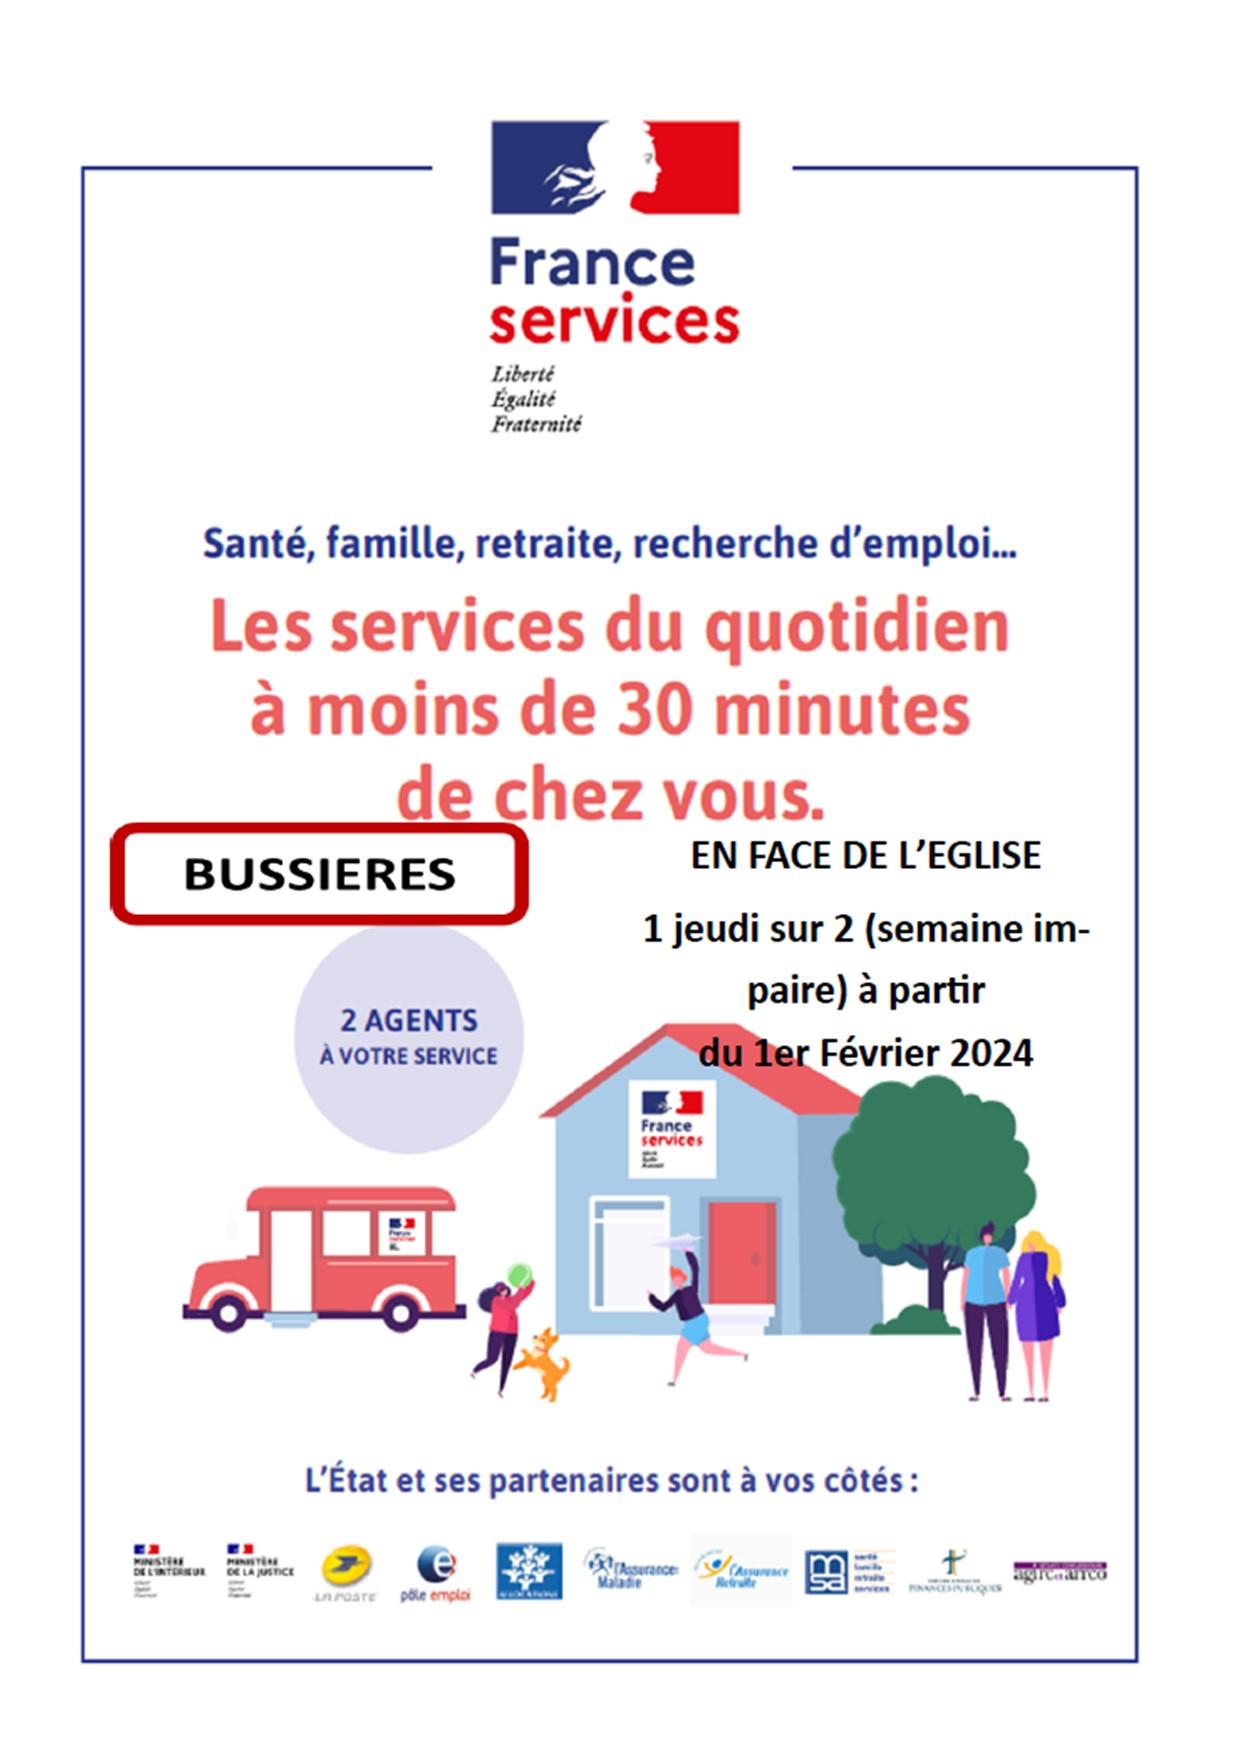 Bus france services bussieres